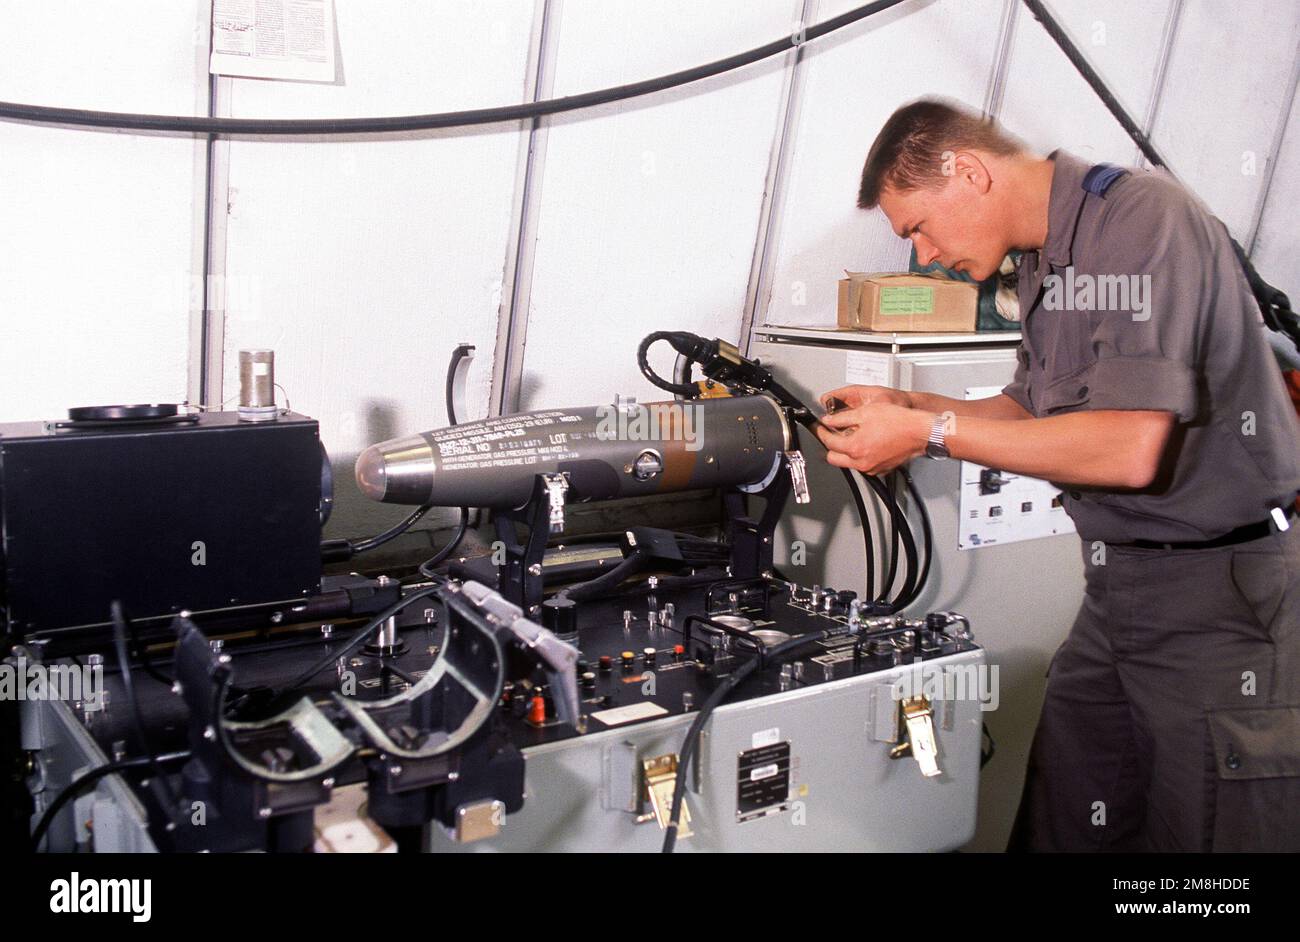 An armament technician of the Dutch air force repairs the guidance system of an AIM-9 Sidewinder missile during Operation Deny Flight, the enforcement of the United Nations-sanctioned no-fly zone over Bosnia and Herzegovina. Subject Operation/Series: DENY FLIGHT Base: Villafranca Air Base Country: Italy (ITA) Stock Photo